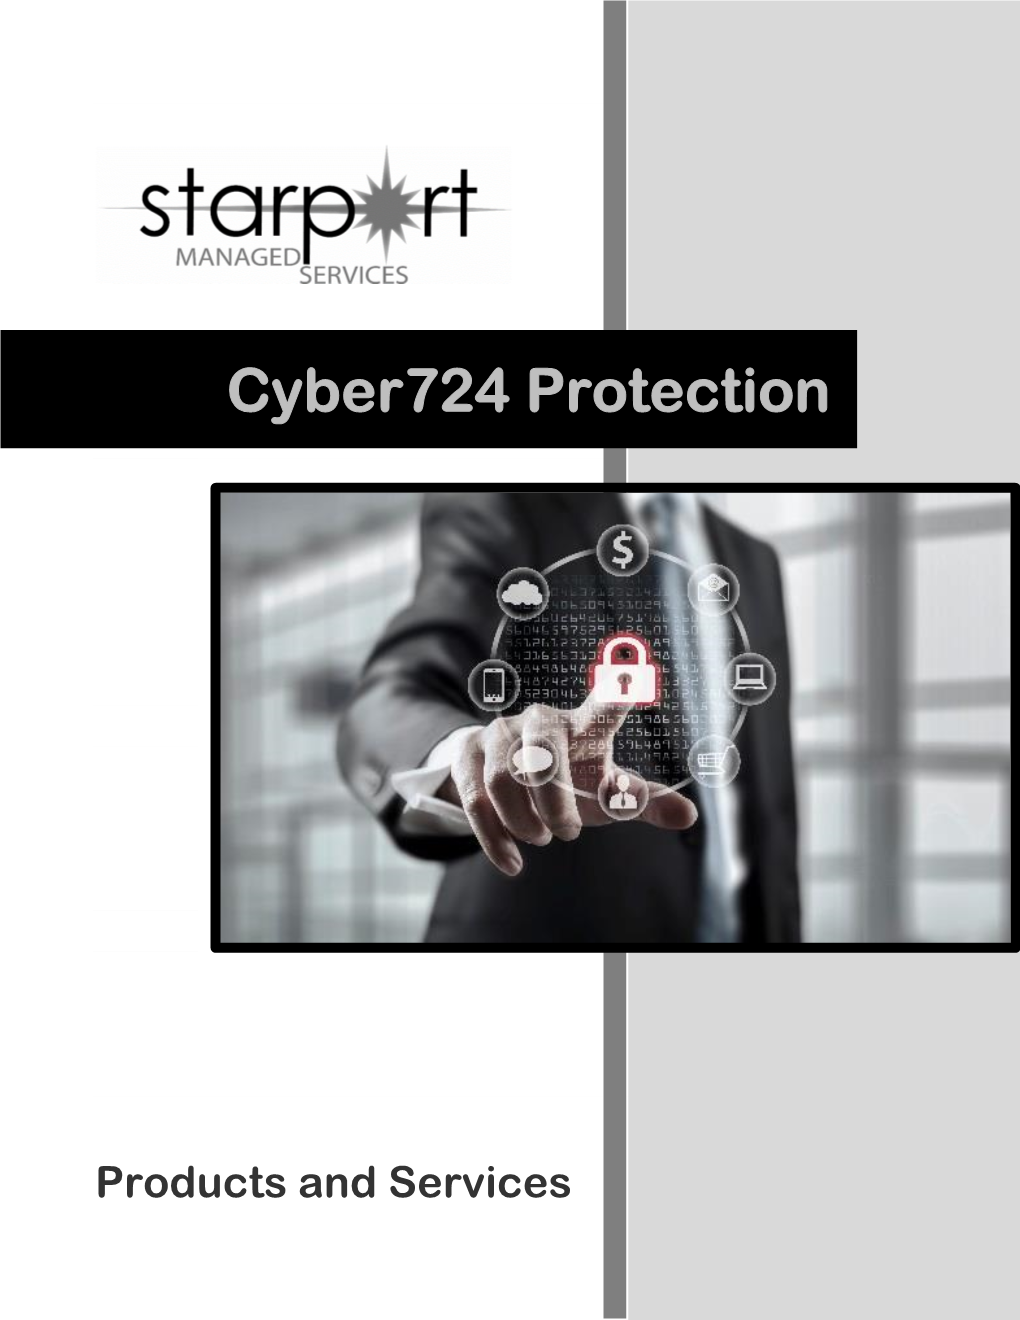 Cyber724 Protection